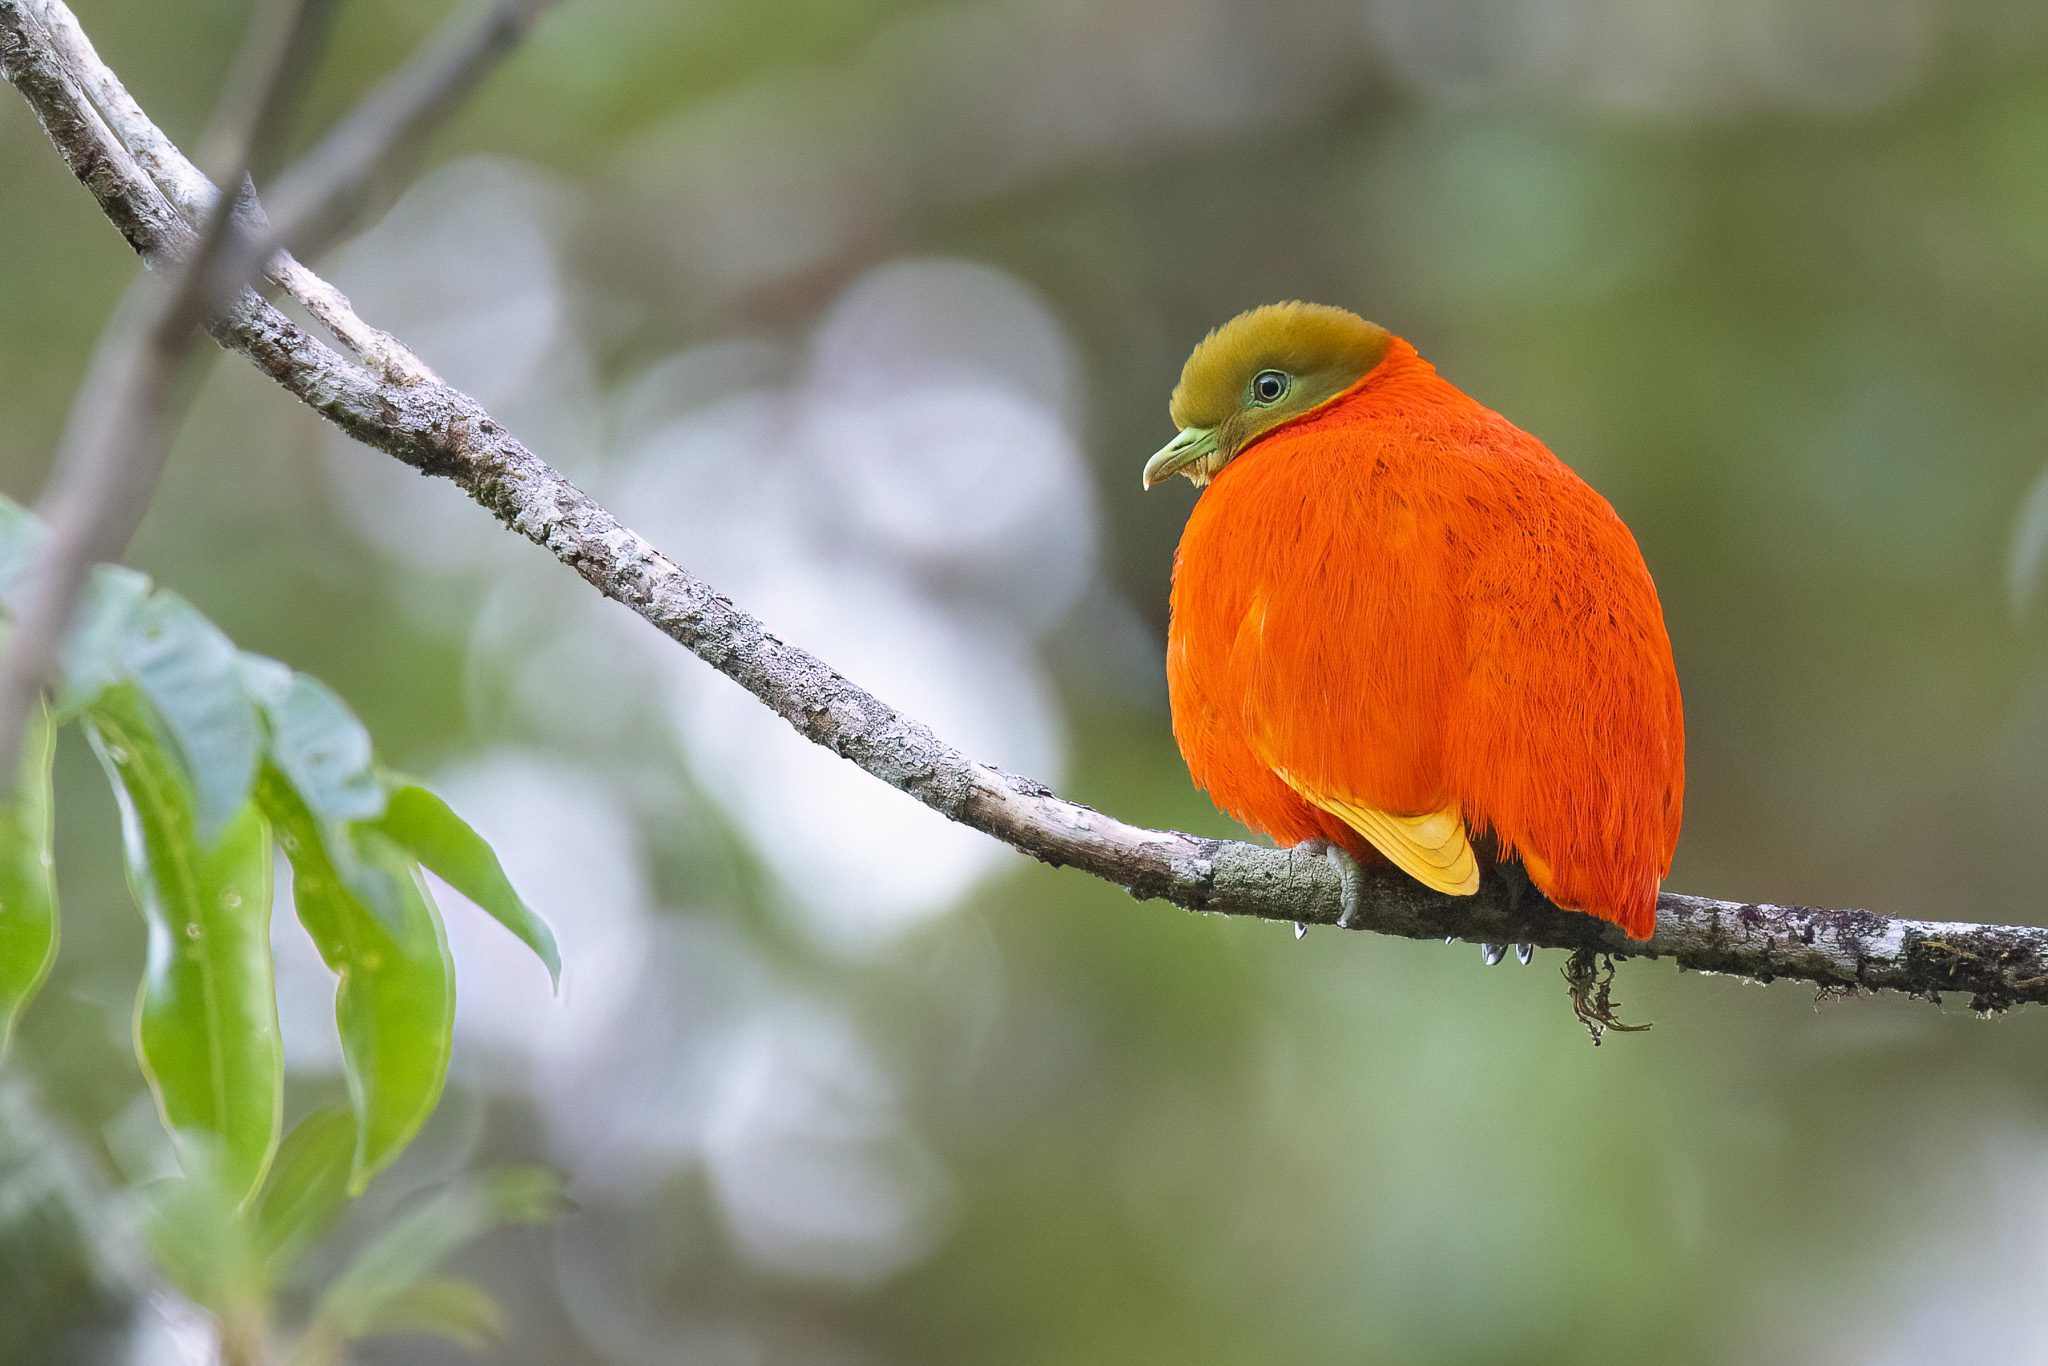 A bright orange, plump looking bird with a yellow-green head, perches on a branch.